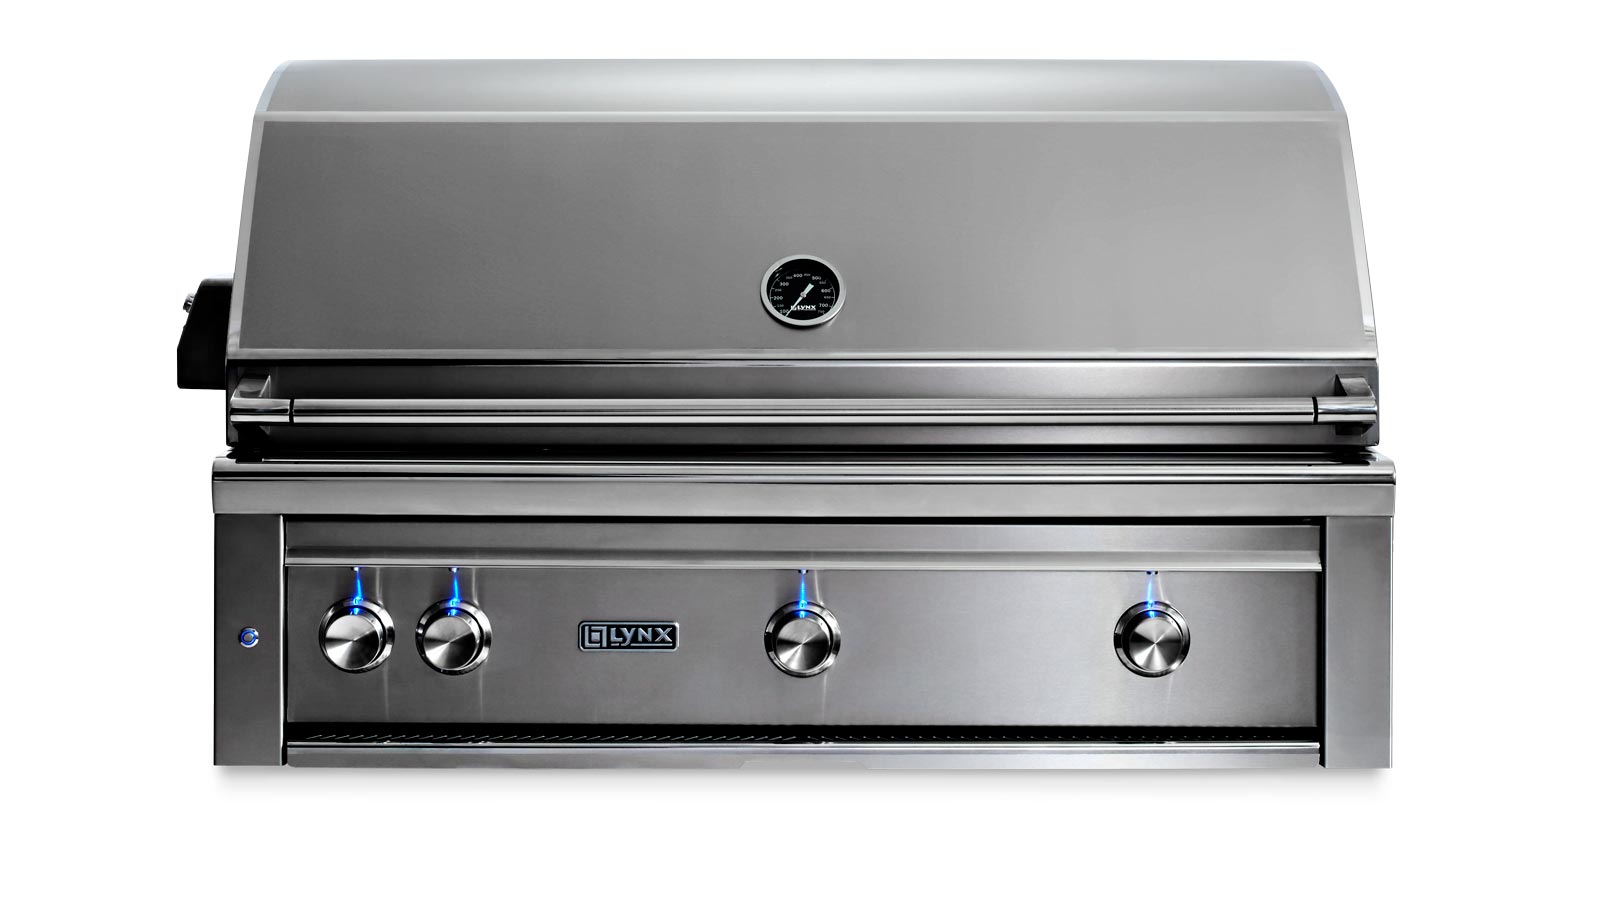 42" Professional Built-in Grill with All Ceramic Burners and Rotisserie (L42R-3)